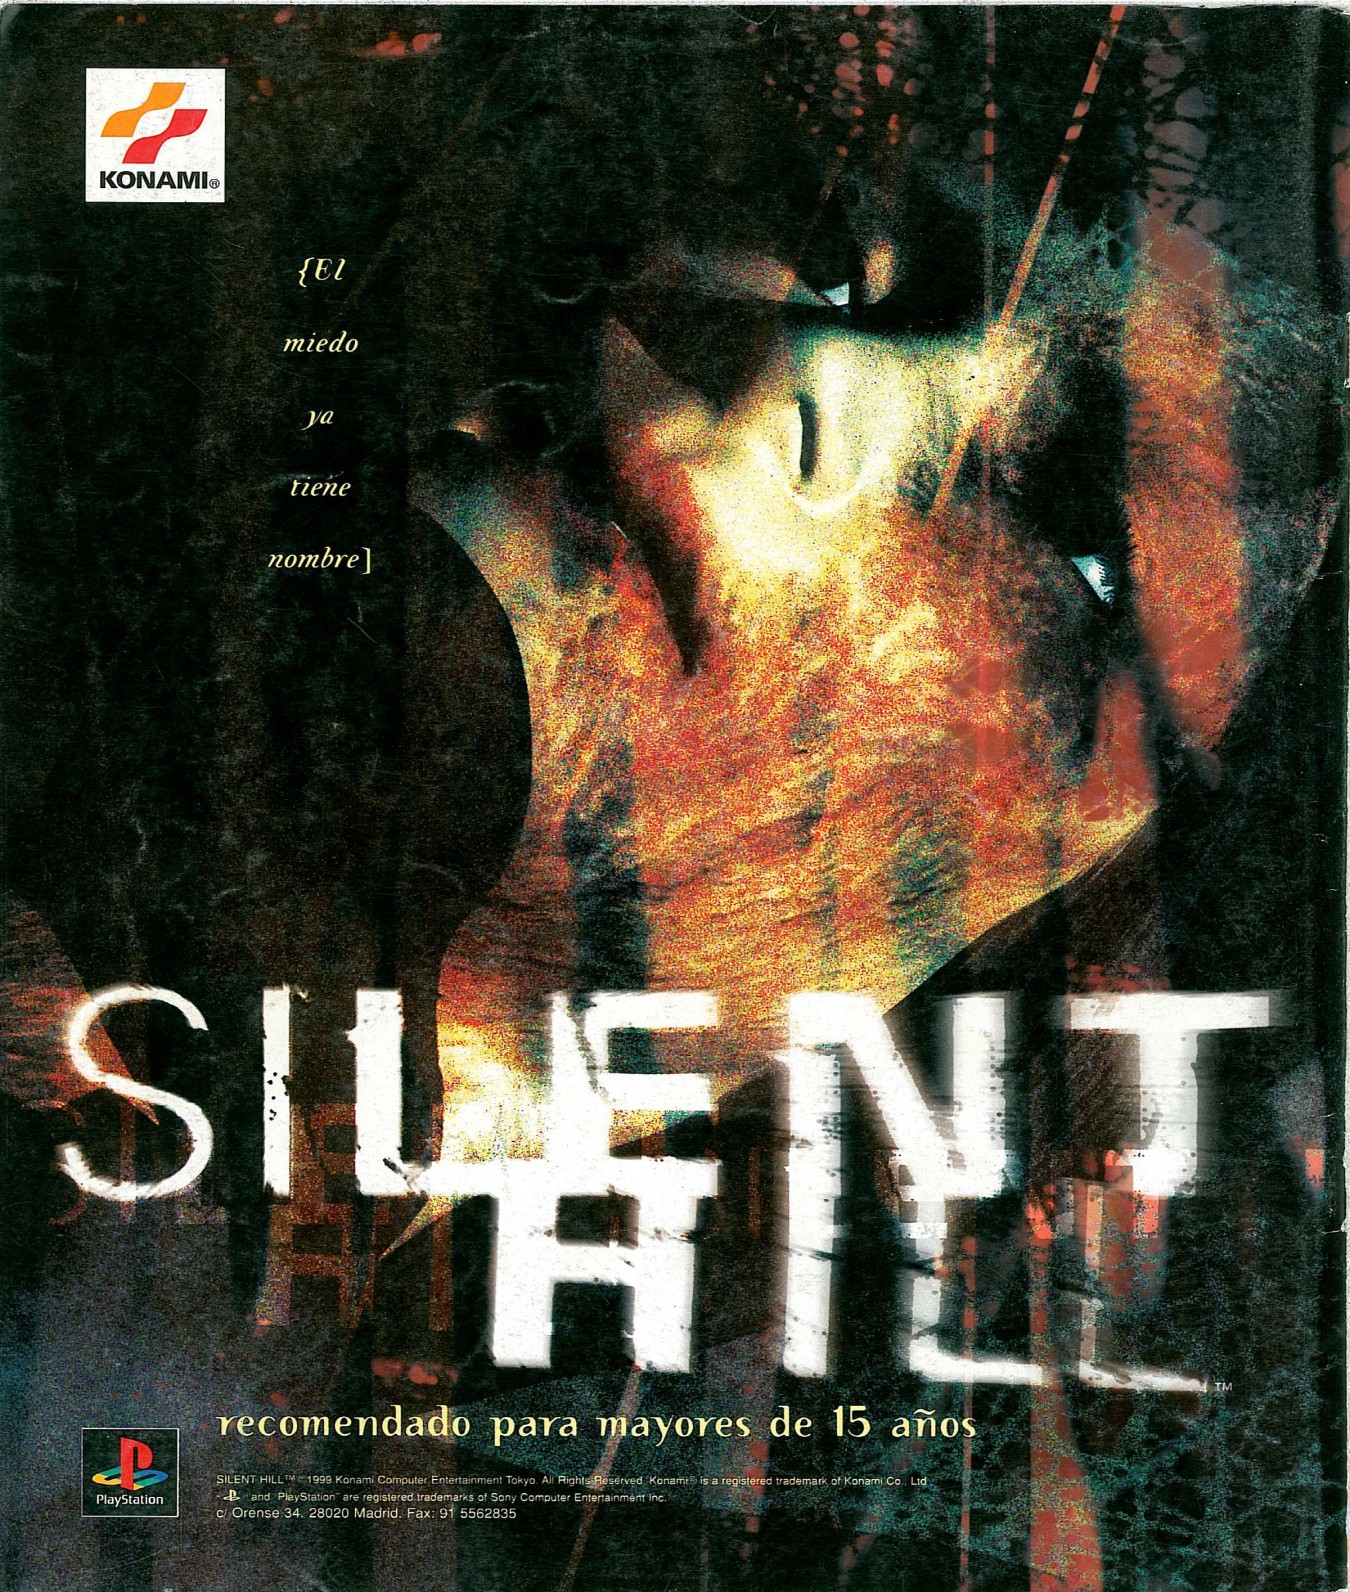 Silent Hill PSX cover